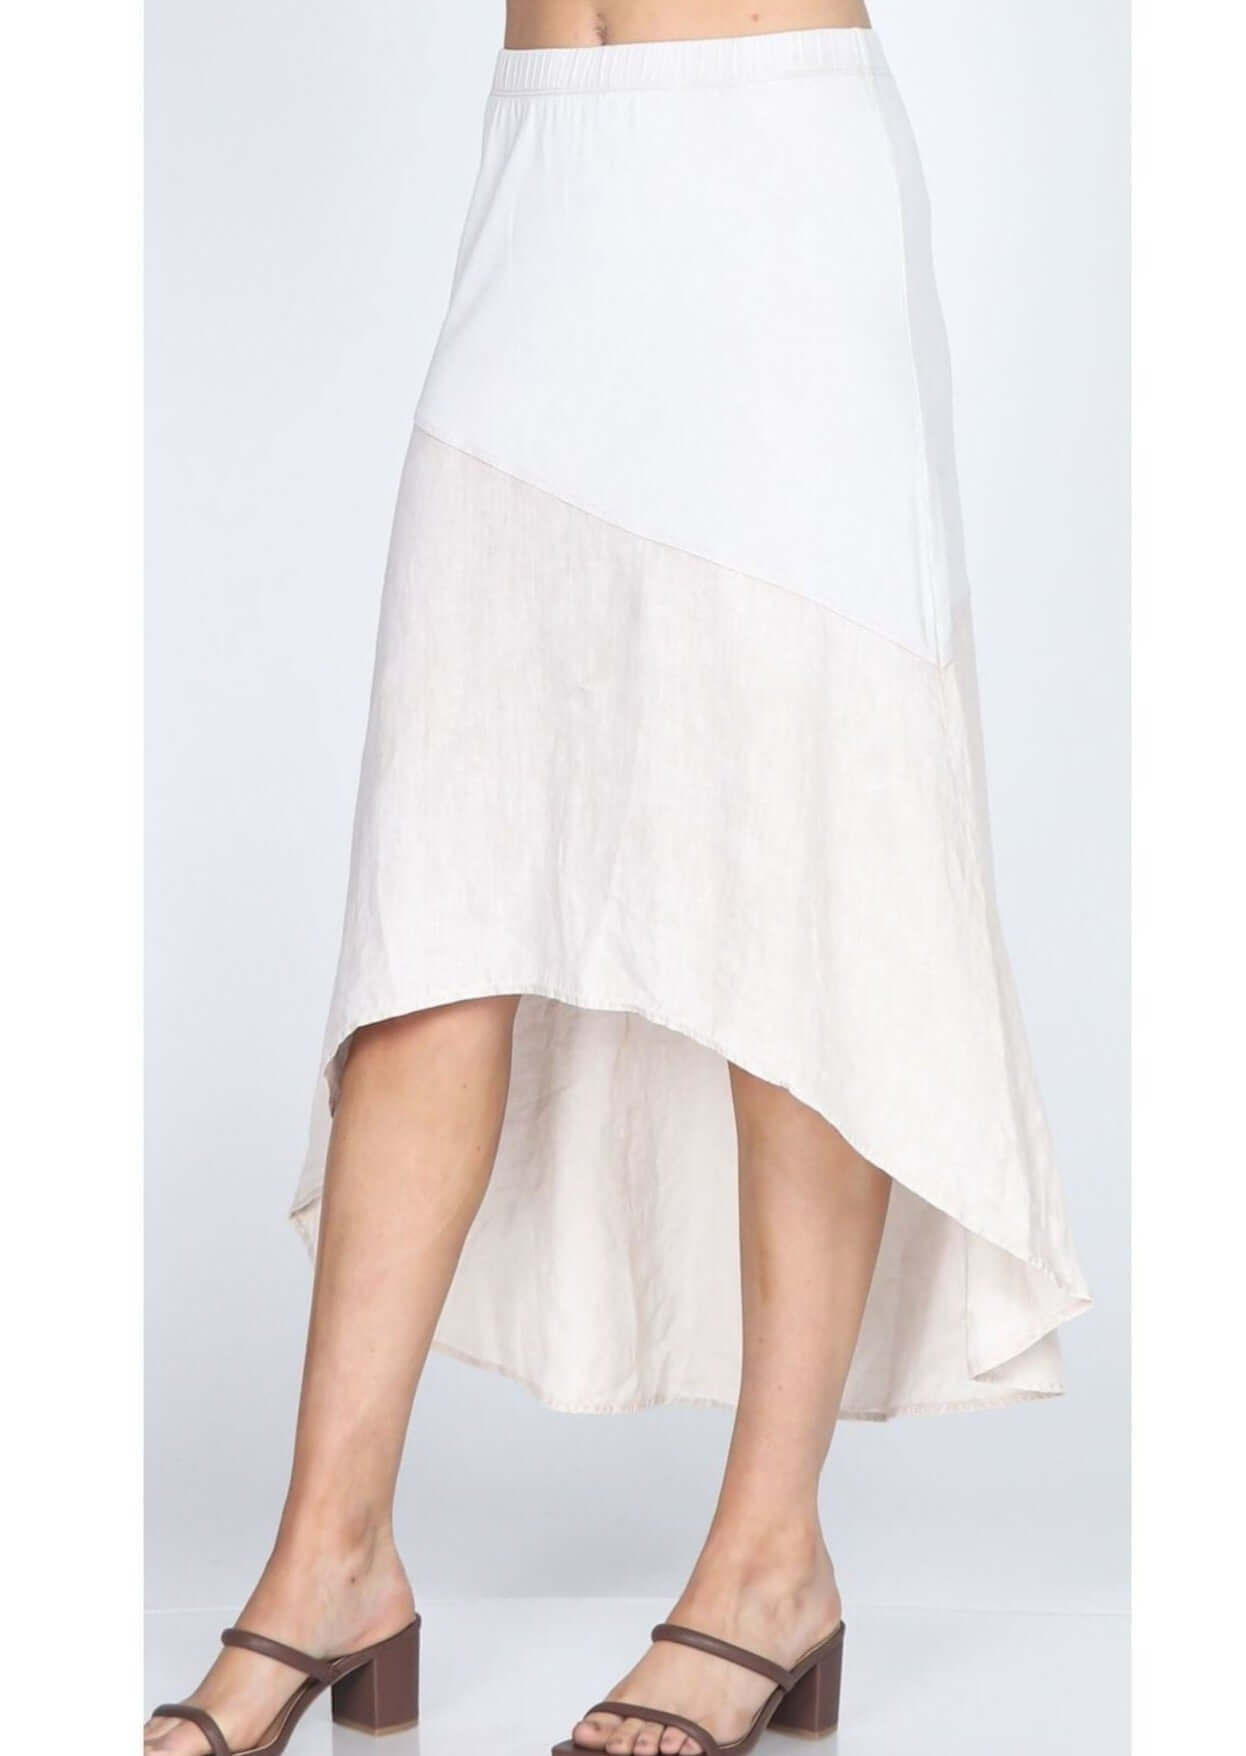 M. Rena Ladies Luxury Linen Hi-Lo French Terry Casual Skirt Available in Dark Denim & Bone | Made in USA | Women's American Made Natural Fabric Clothing  | Color: Bone